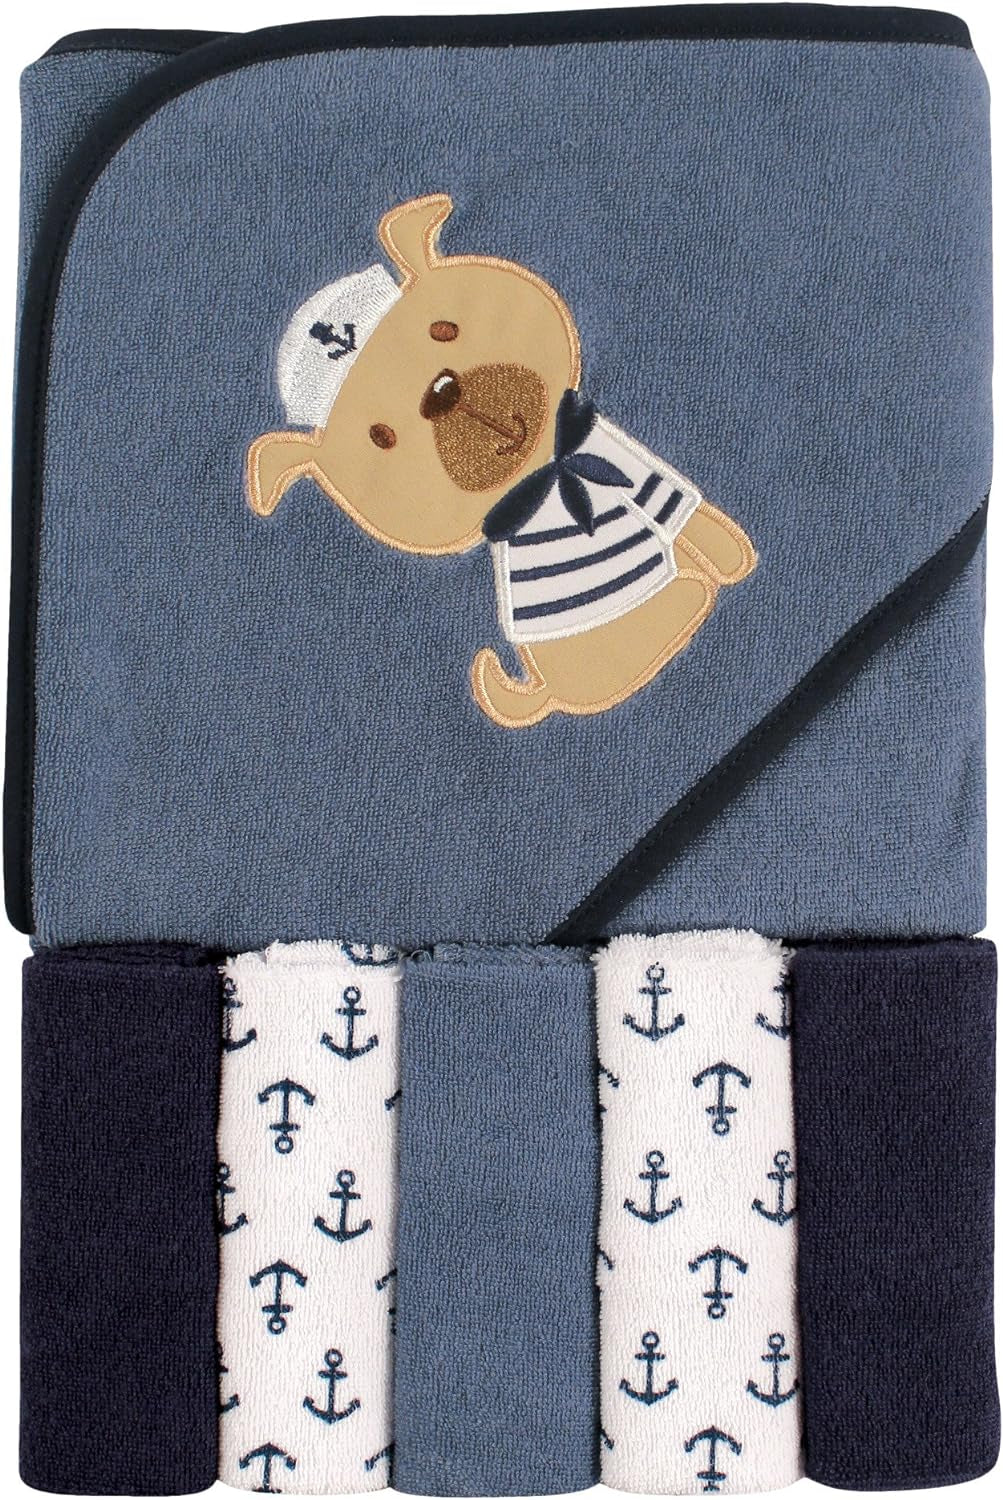 Unisex Baby Hooded Towel with Five Washcloths, Cotton,Polyester,Ikat Elephant, One Size